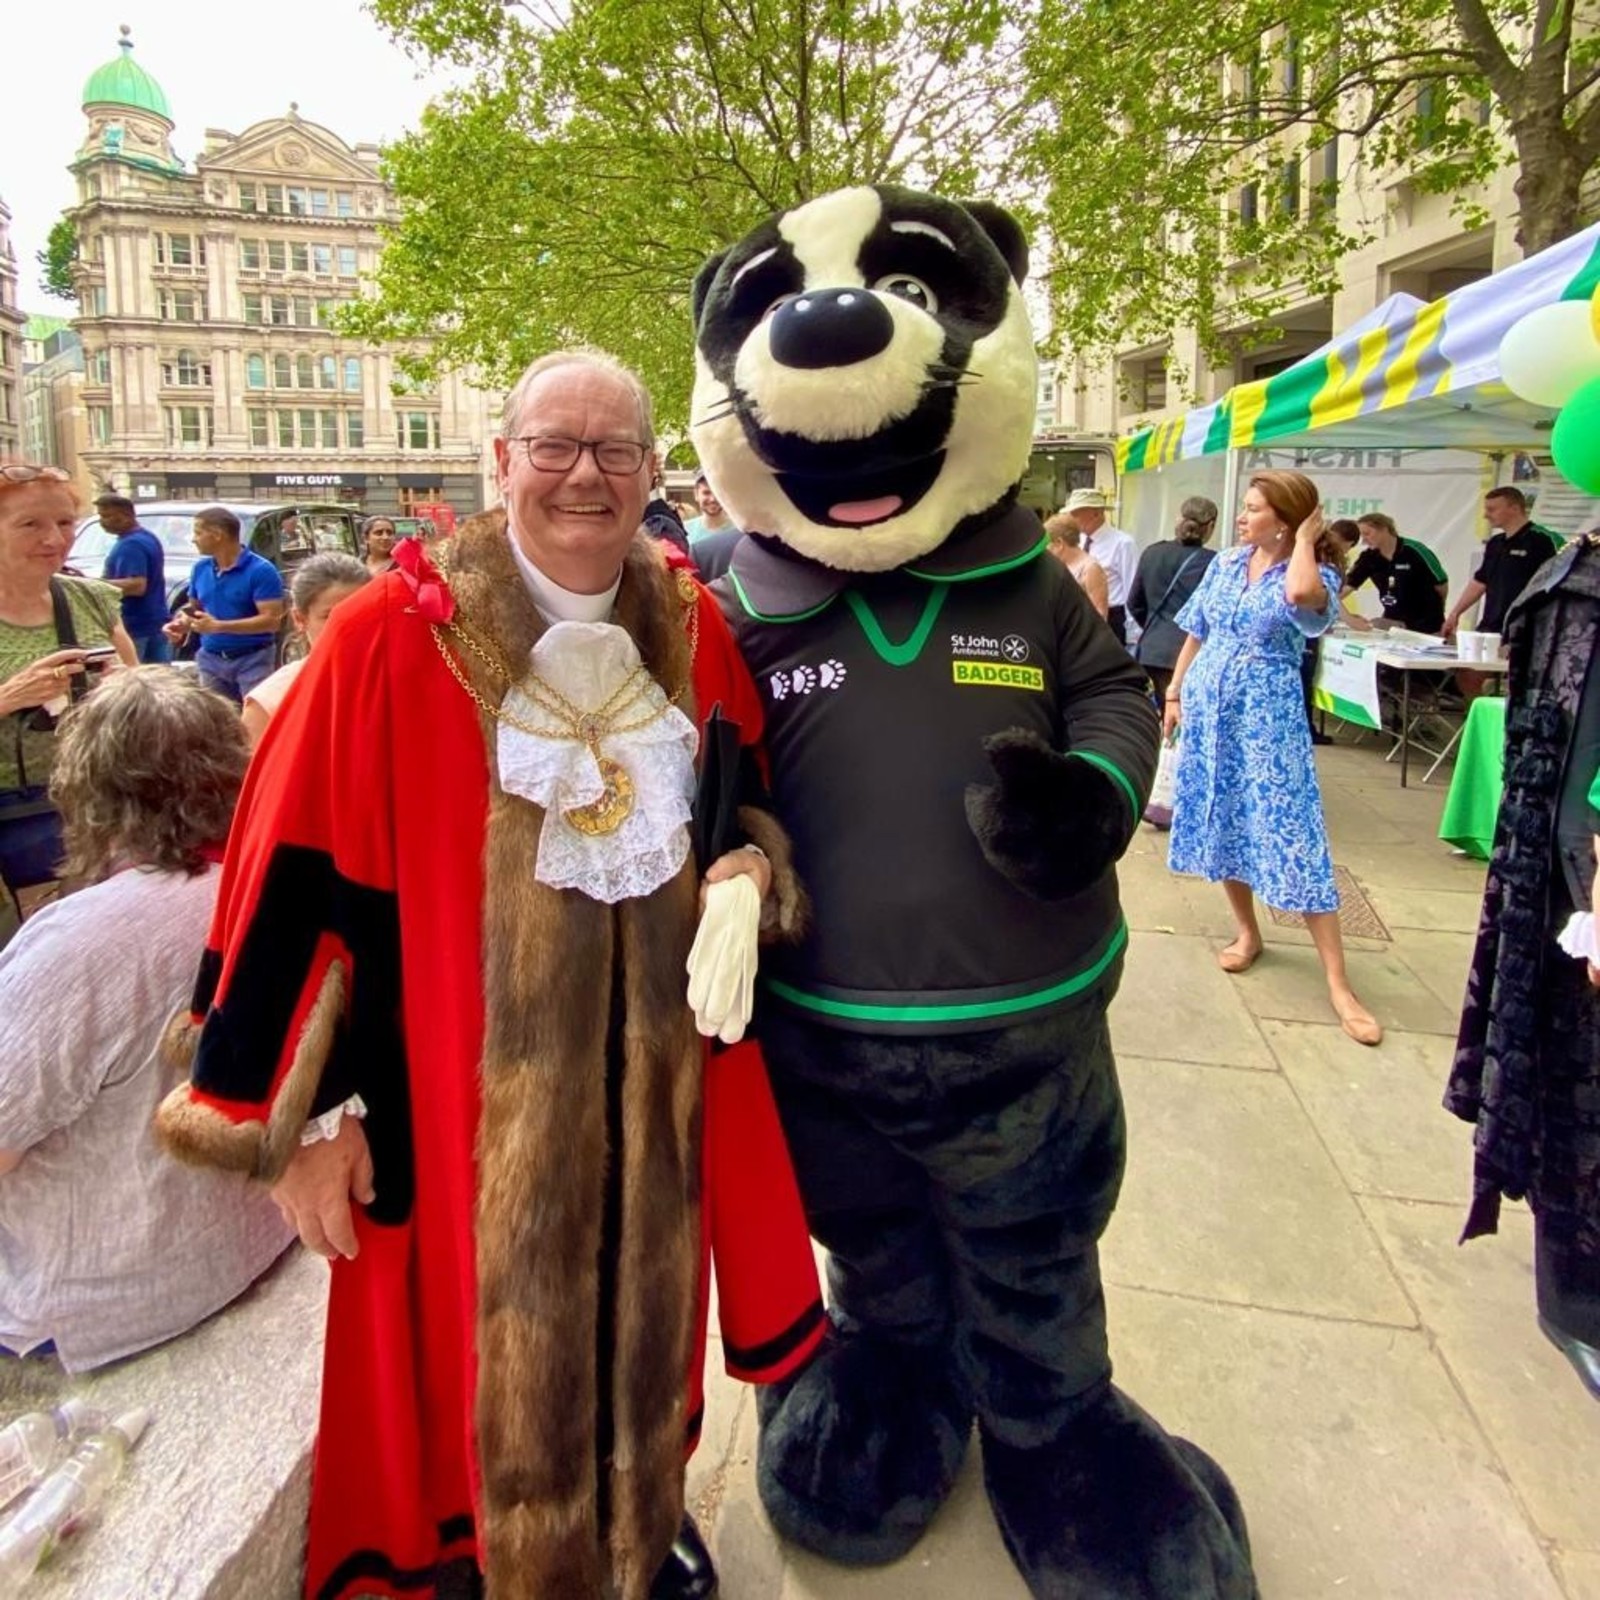 3 July 2023 - Delighted to attend the 2023 St John Assembly at Guildhall and subsequent church service at St Paul’s. an outstanding organisation whose efforts benefit society enormously. Bravo!